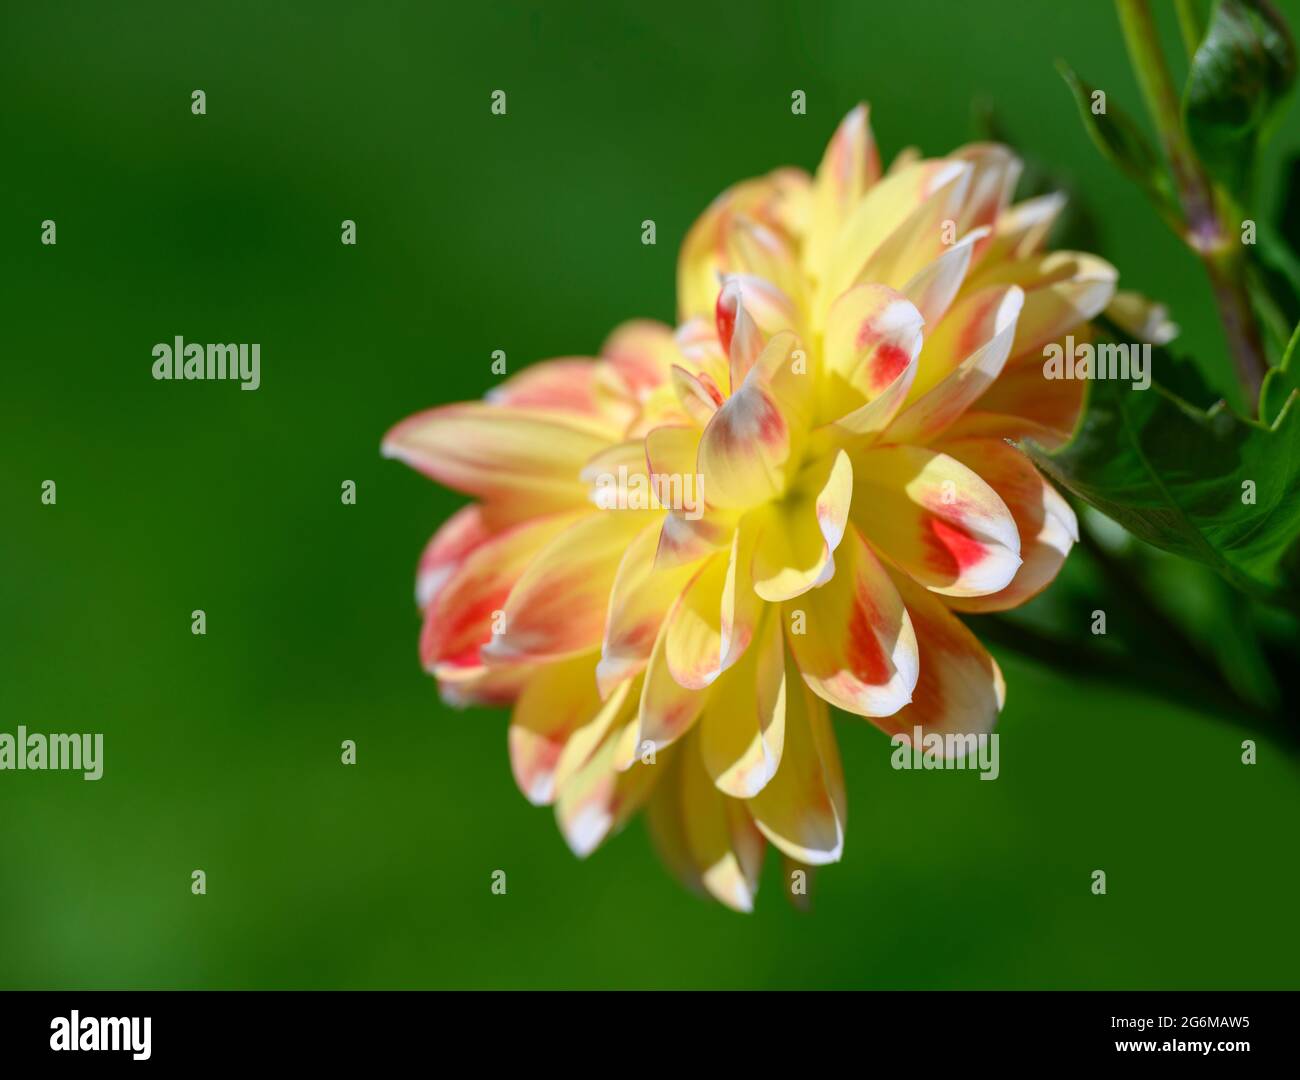 Side view of a beautiful pink and yellow Dahlia flower against an out of focus green lawn background Stock Photo